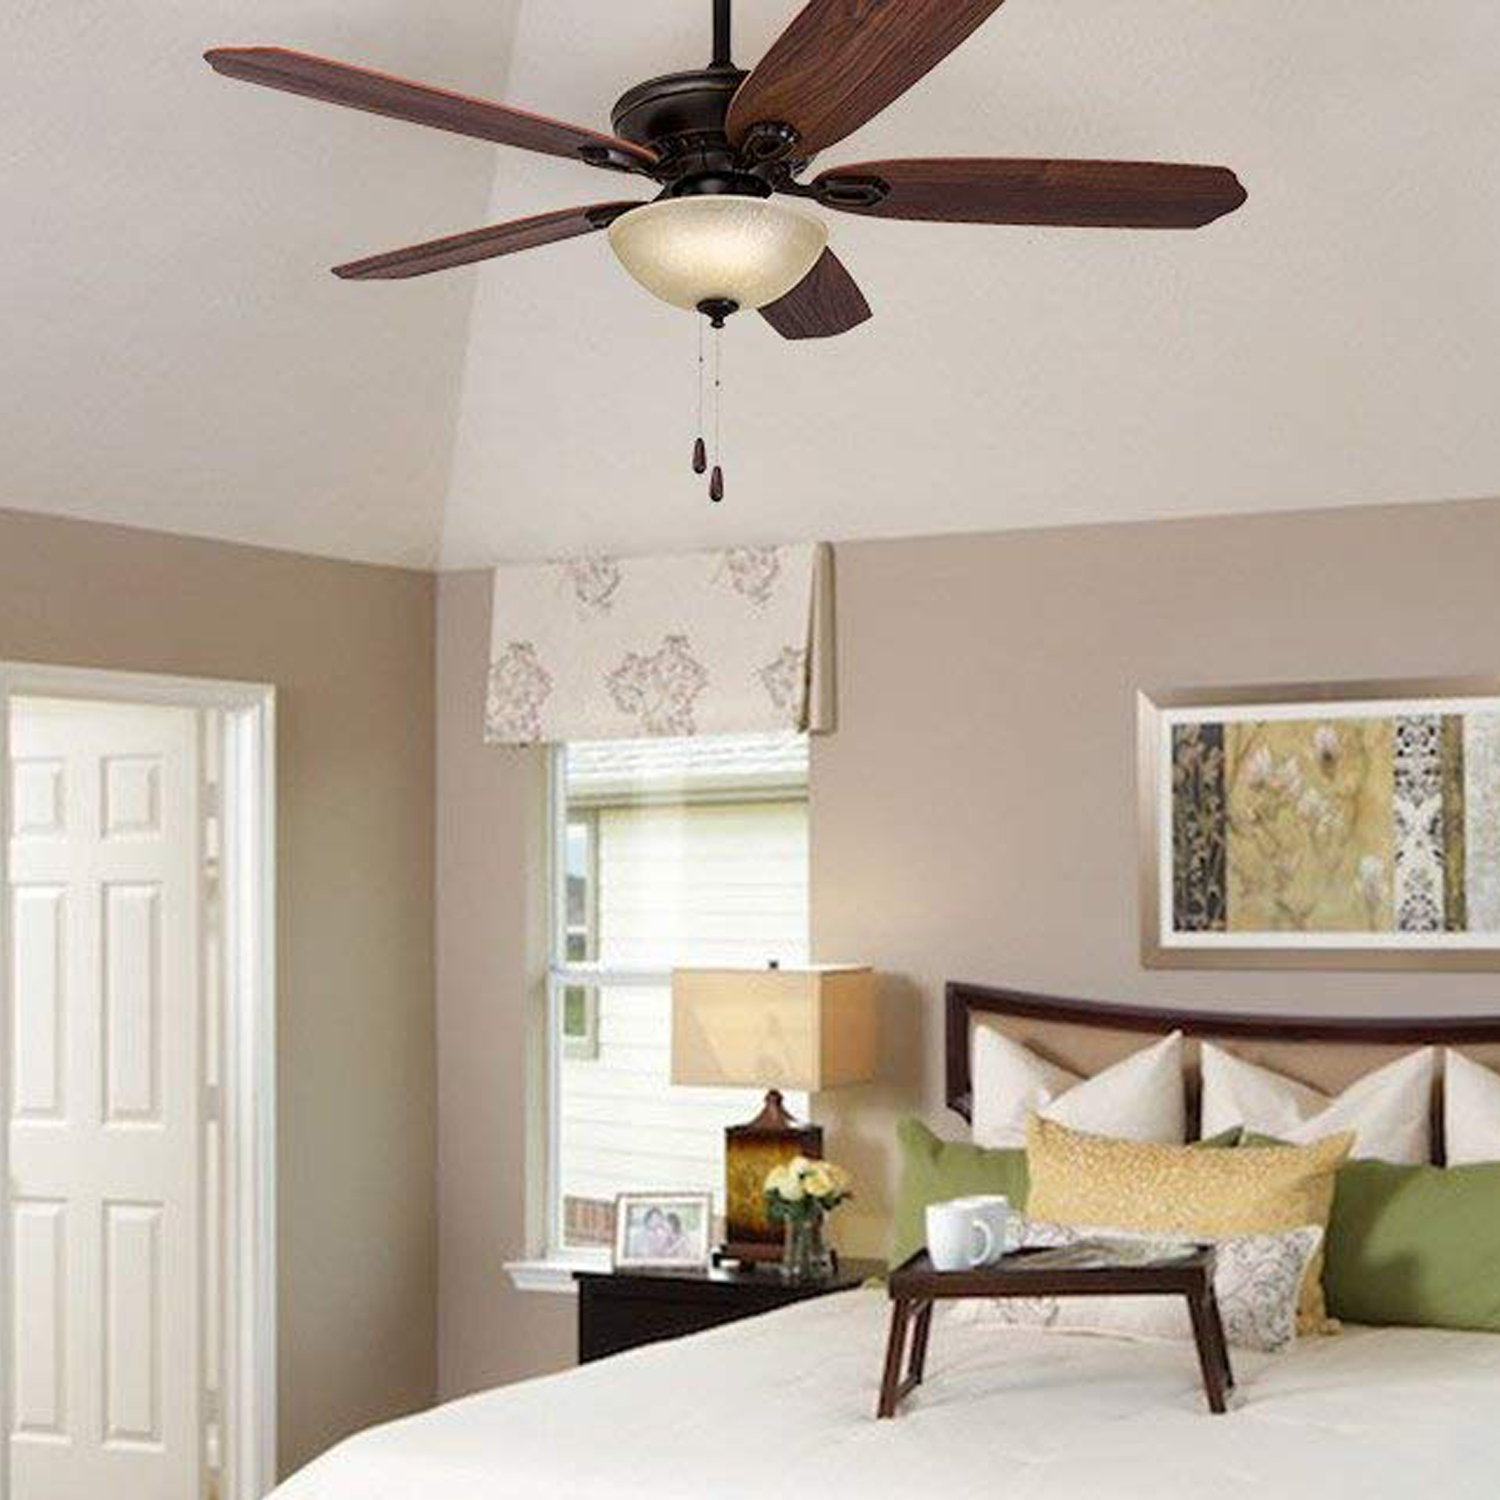 52 Inch Spring Hollow, Oil Rubbed Bronze, Pull Chain, Ceiling Fan